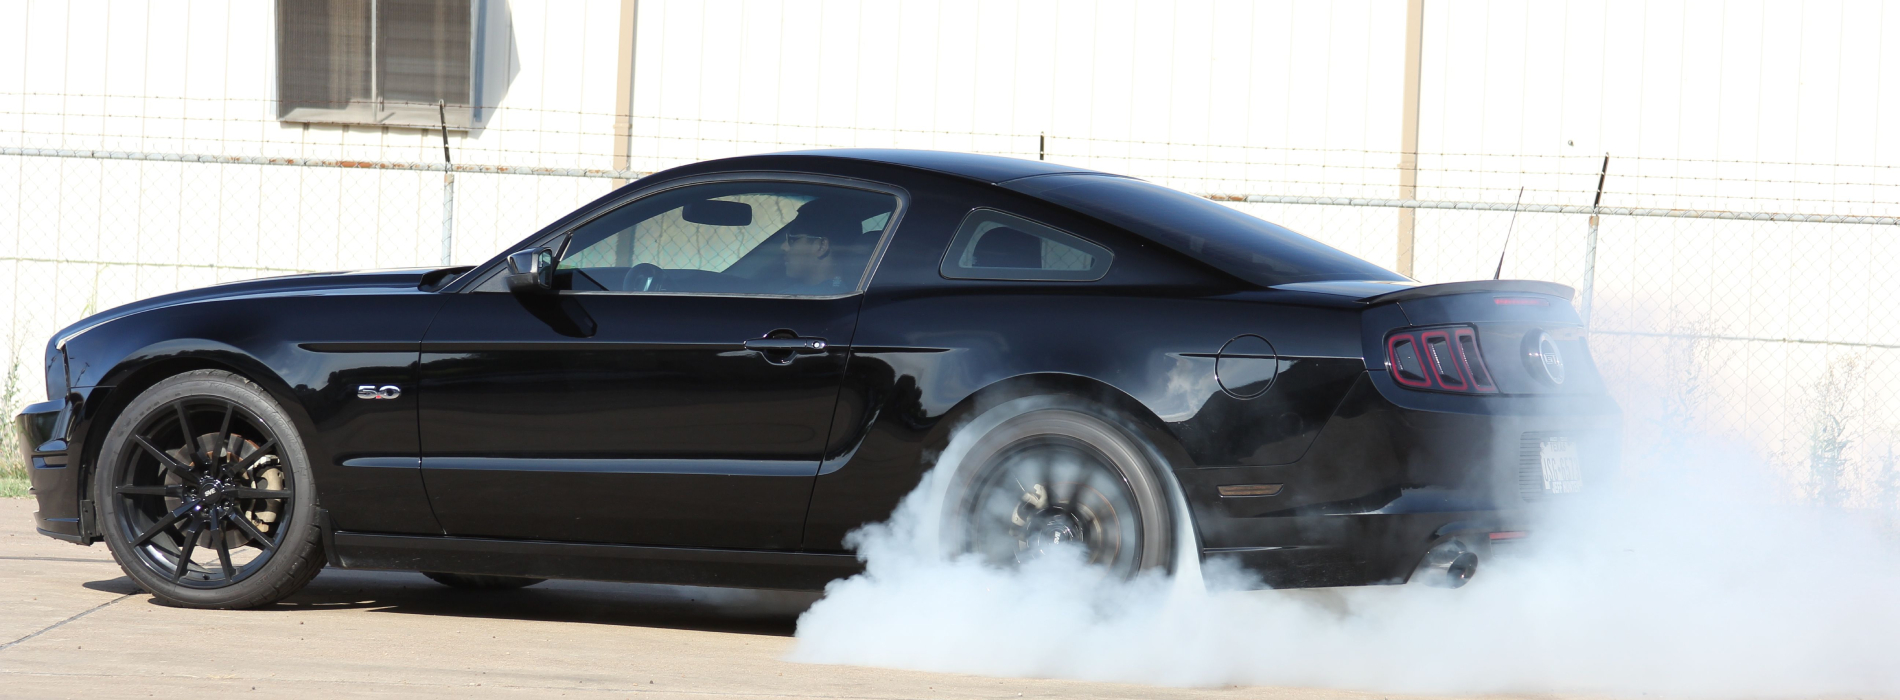 How To Do A Burnout In Your Mustang - How To Do A Burnout In Your Mustang